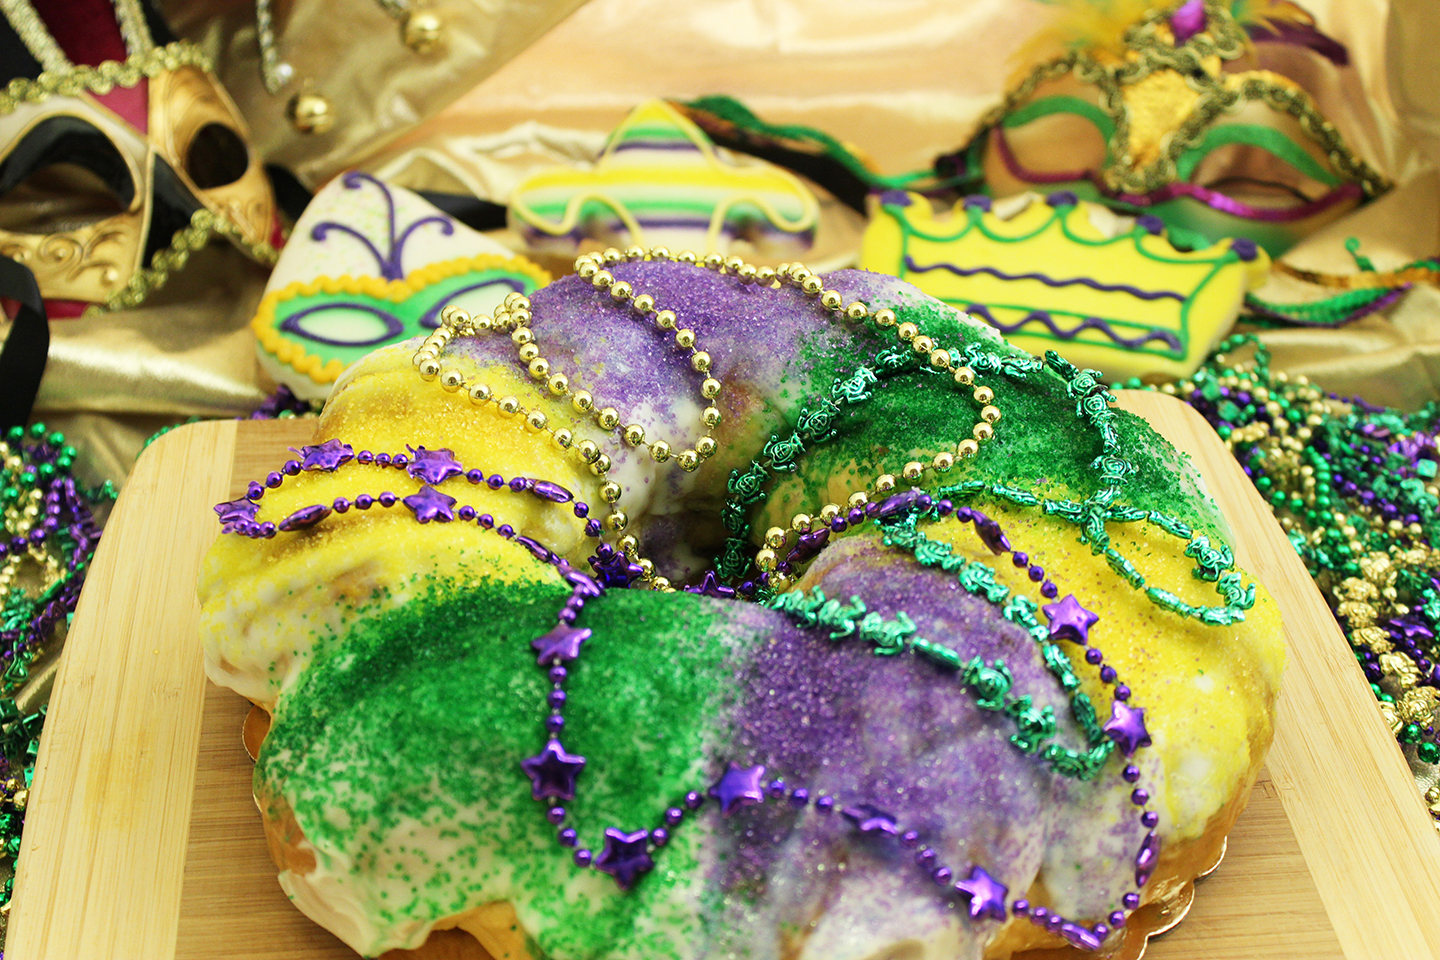 King Cakes are here!